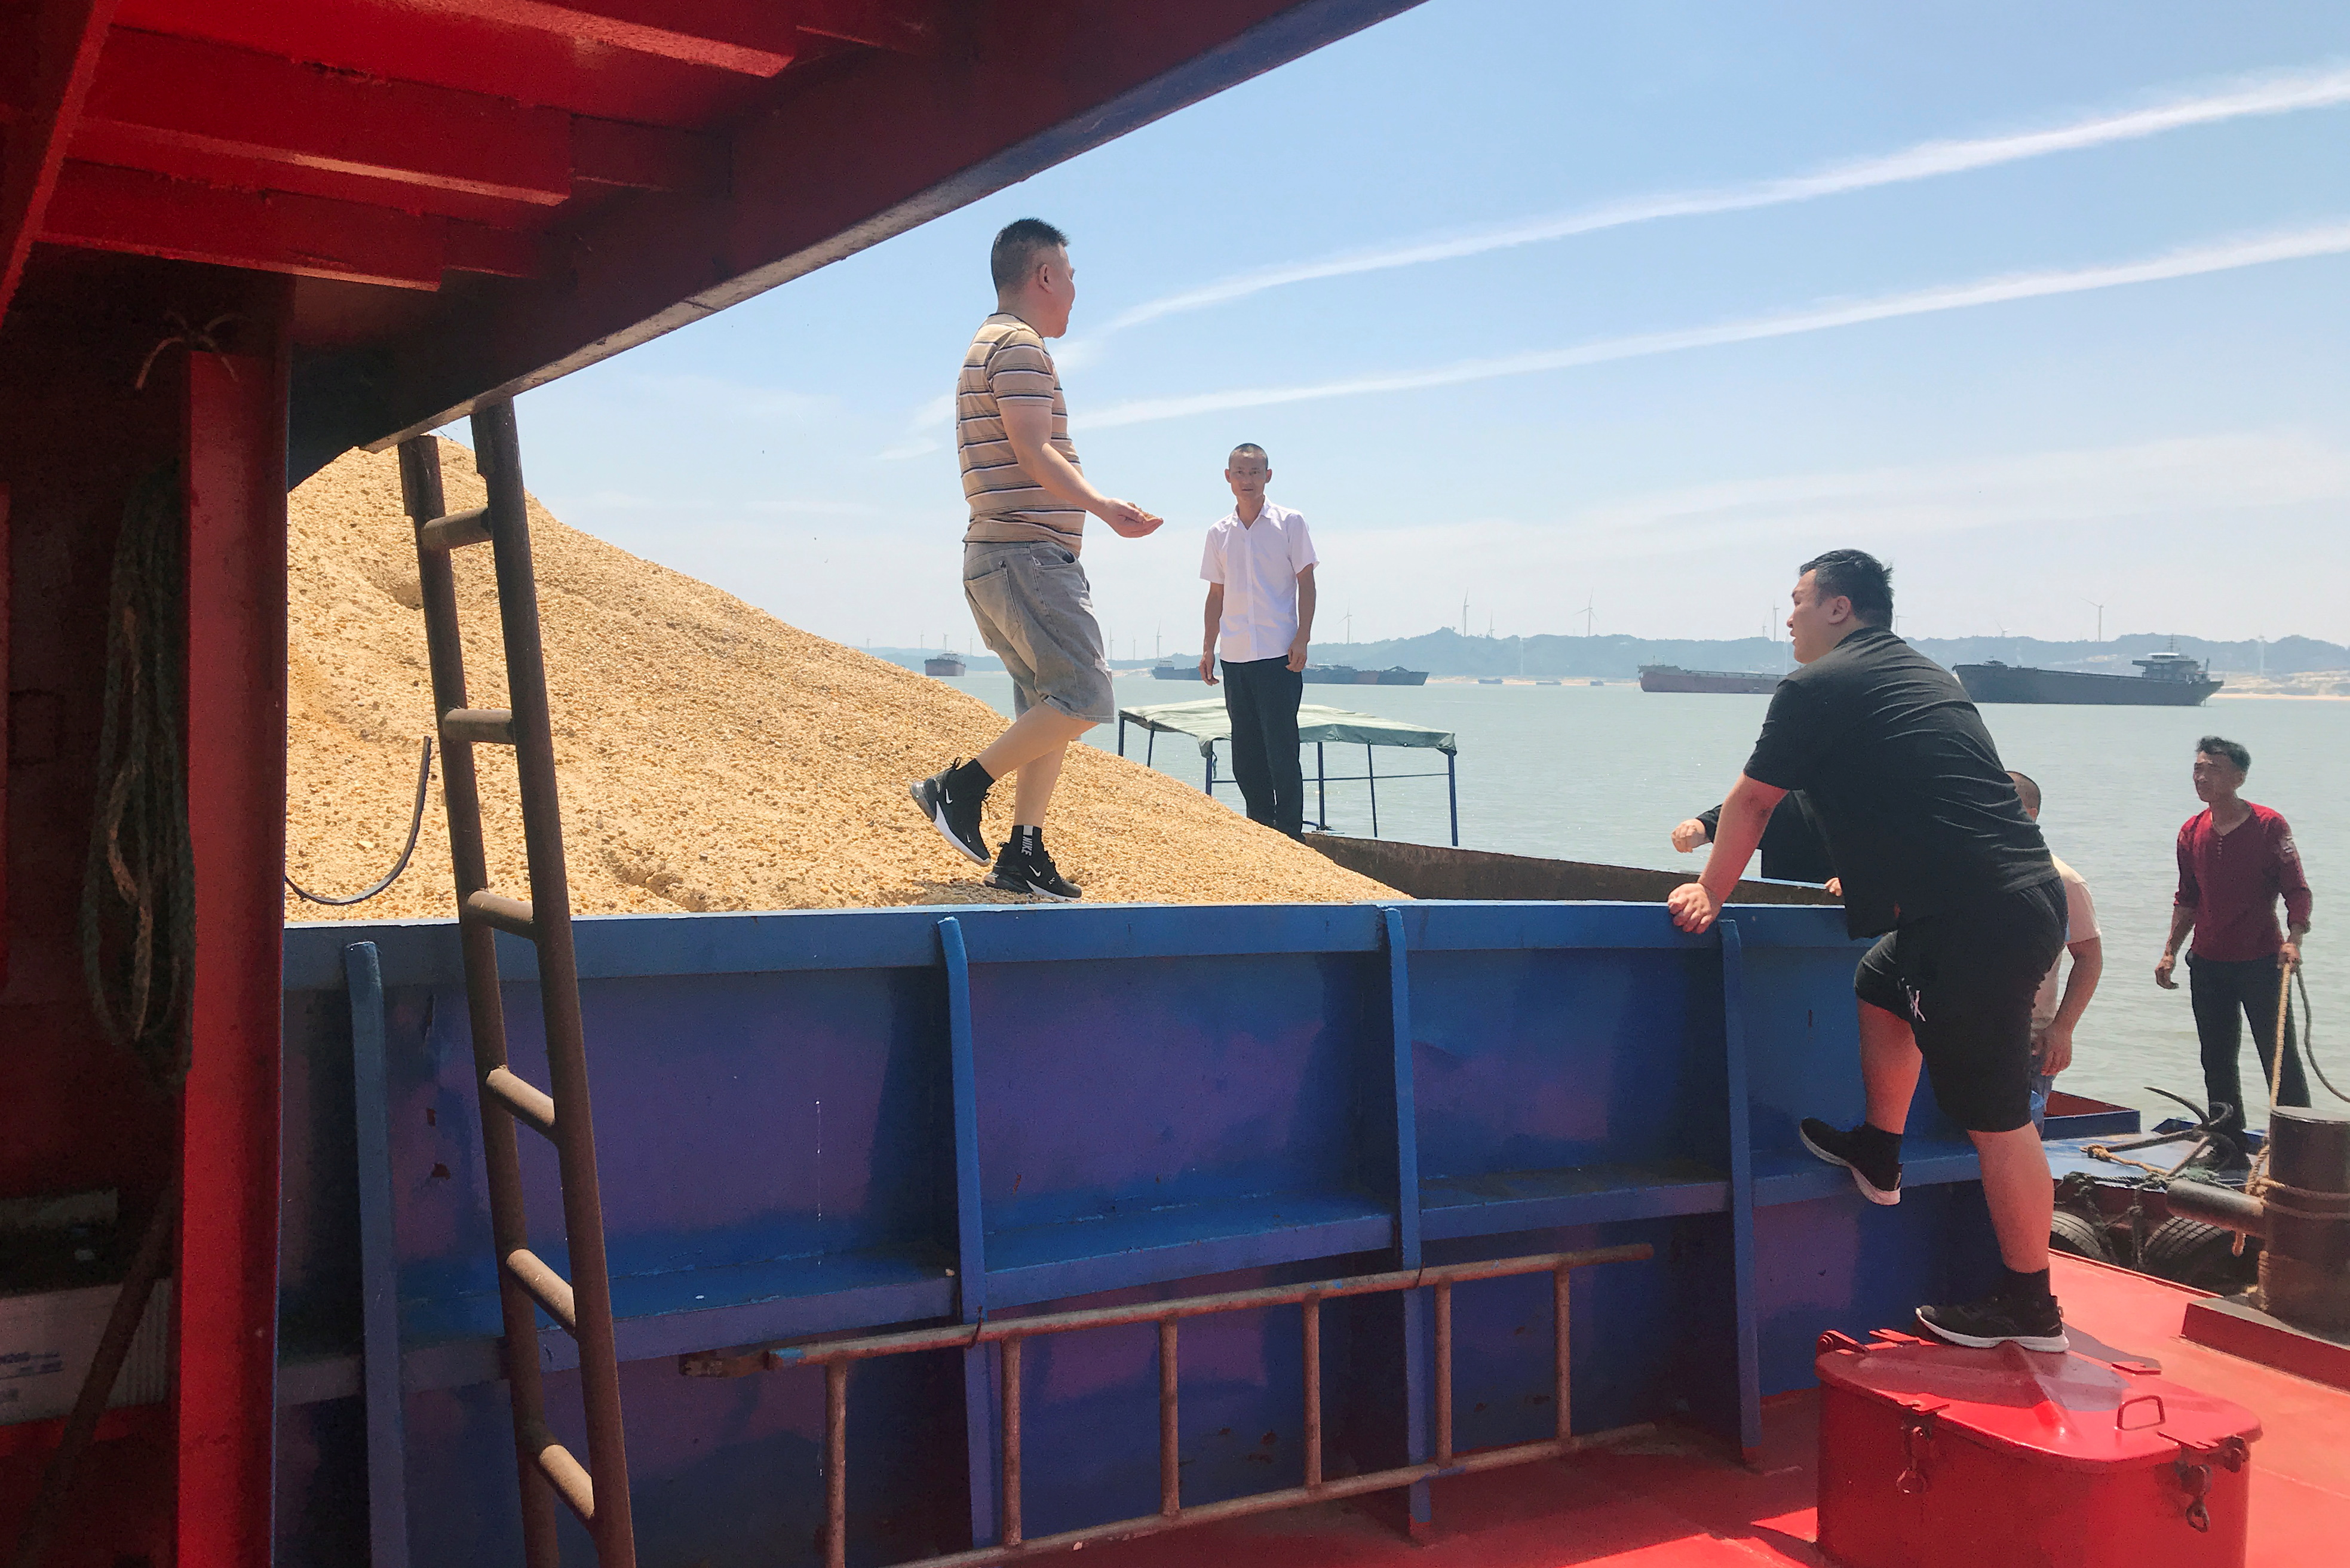 Assessors inspect sand on barges on Poyang Lake in Jiujiang